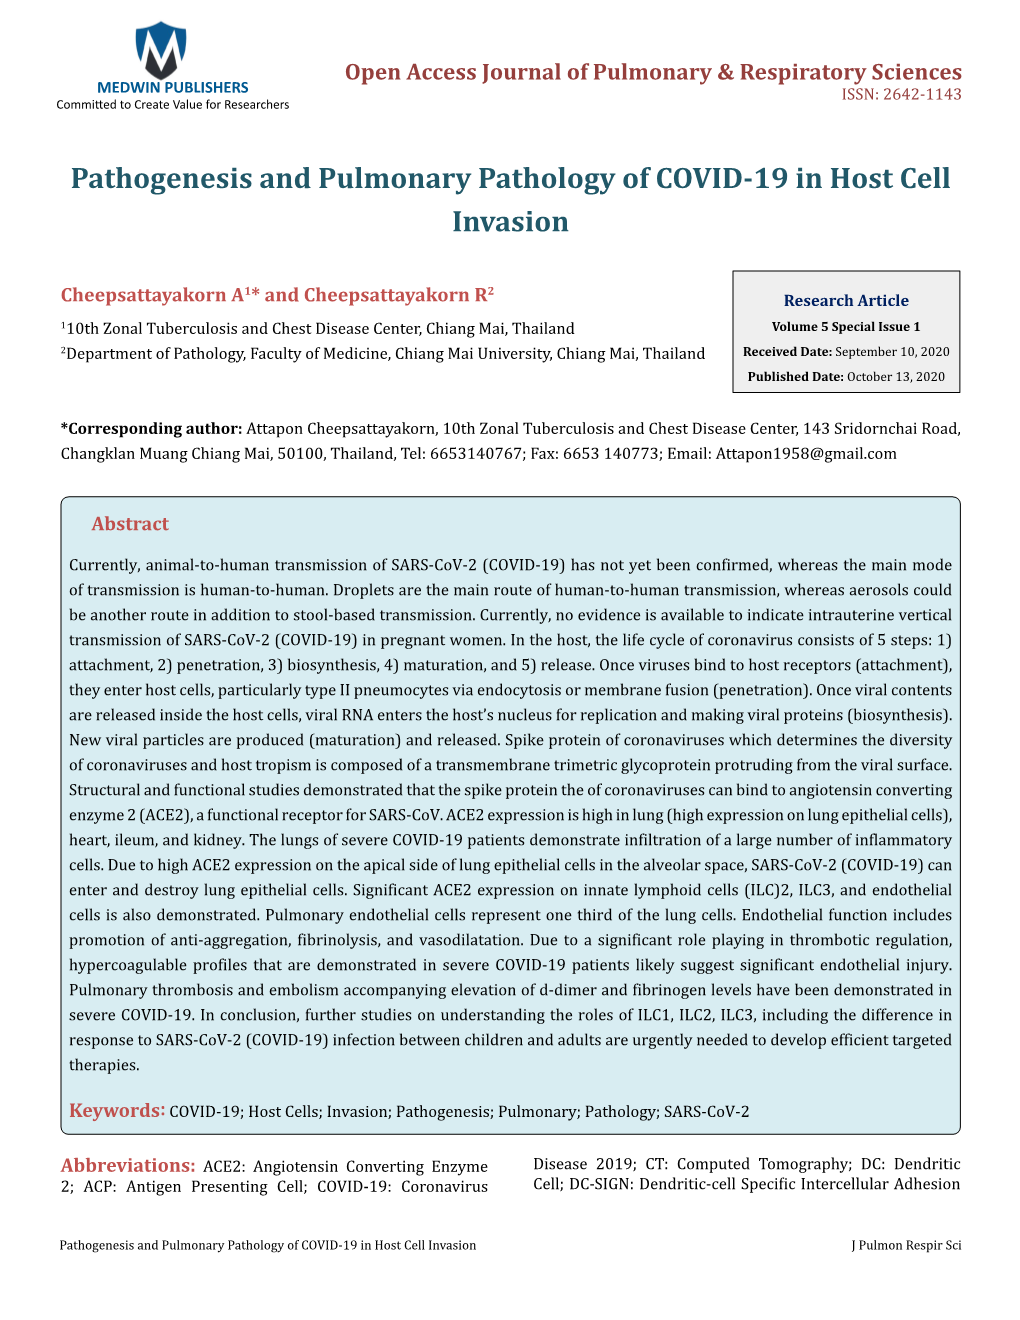 Pathogenesis and Pulmonary Pathology of COVID-19 in Host Cell Invasion